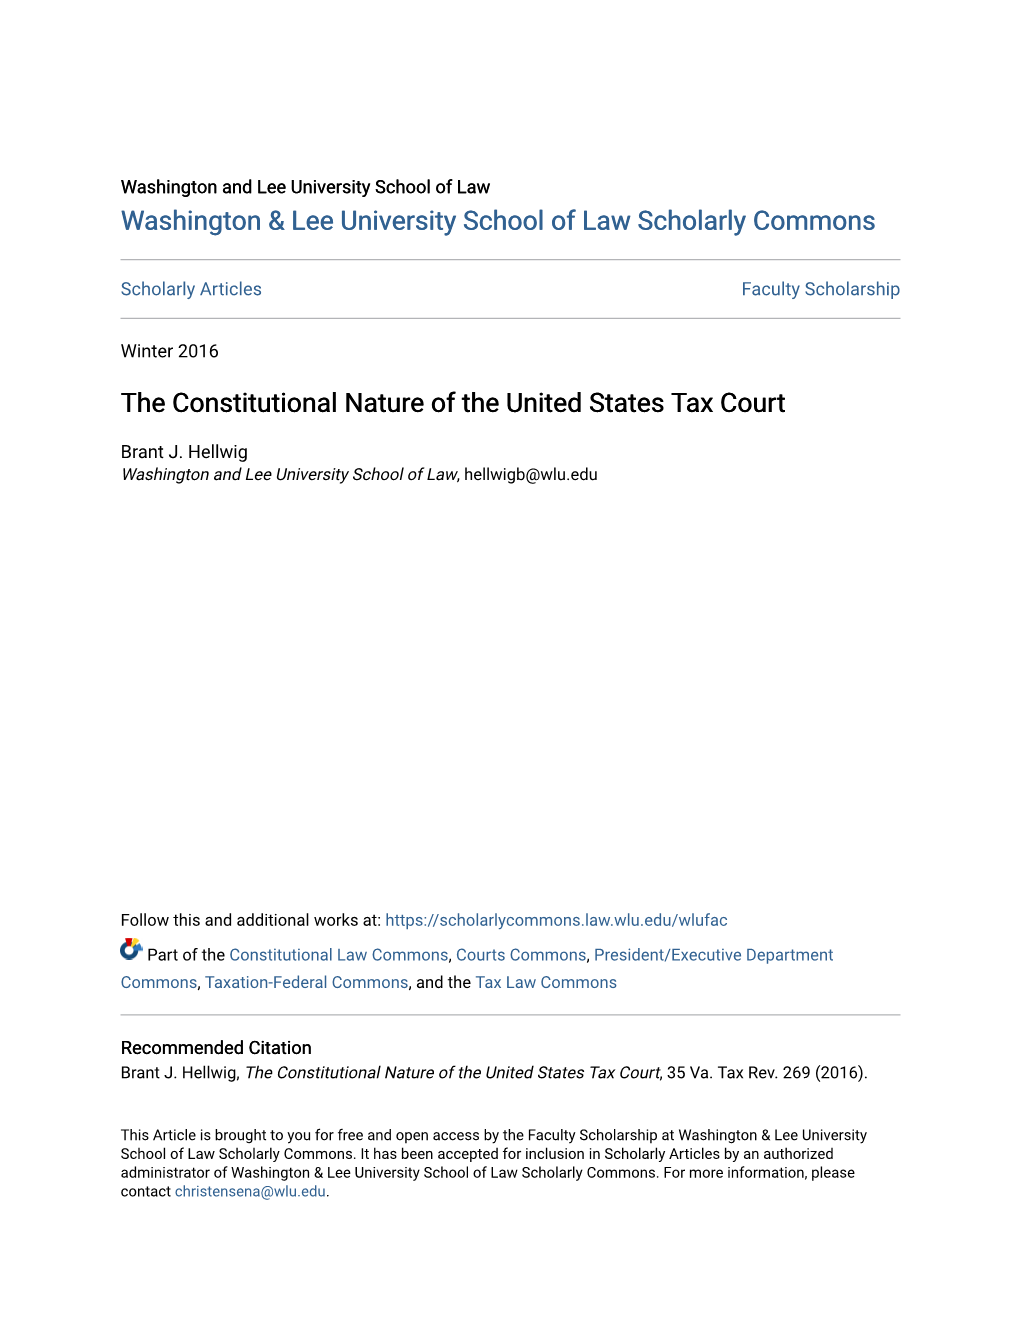 The Constitutional Nature of the United States Tax Court